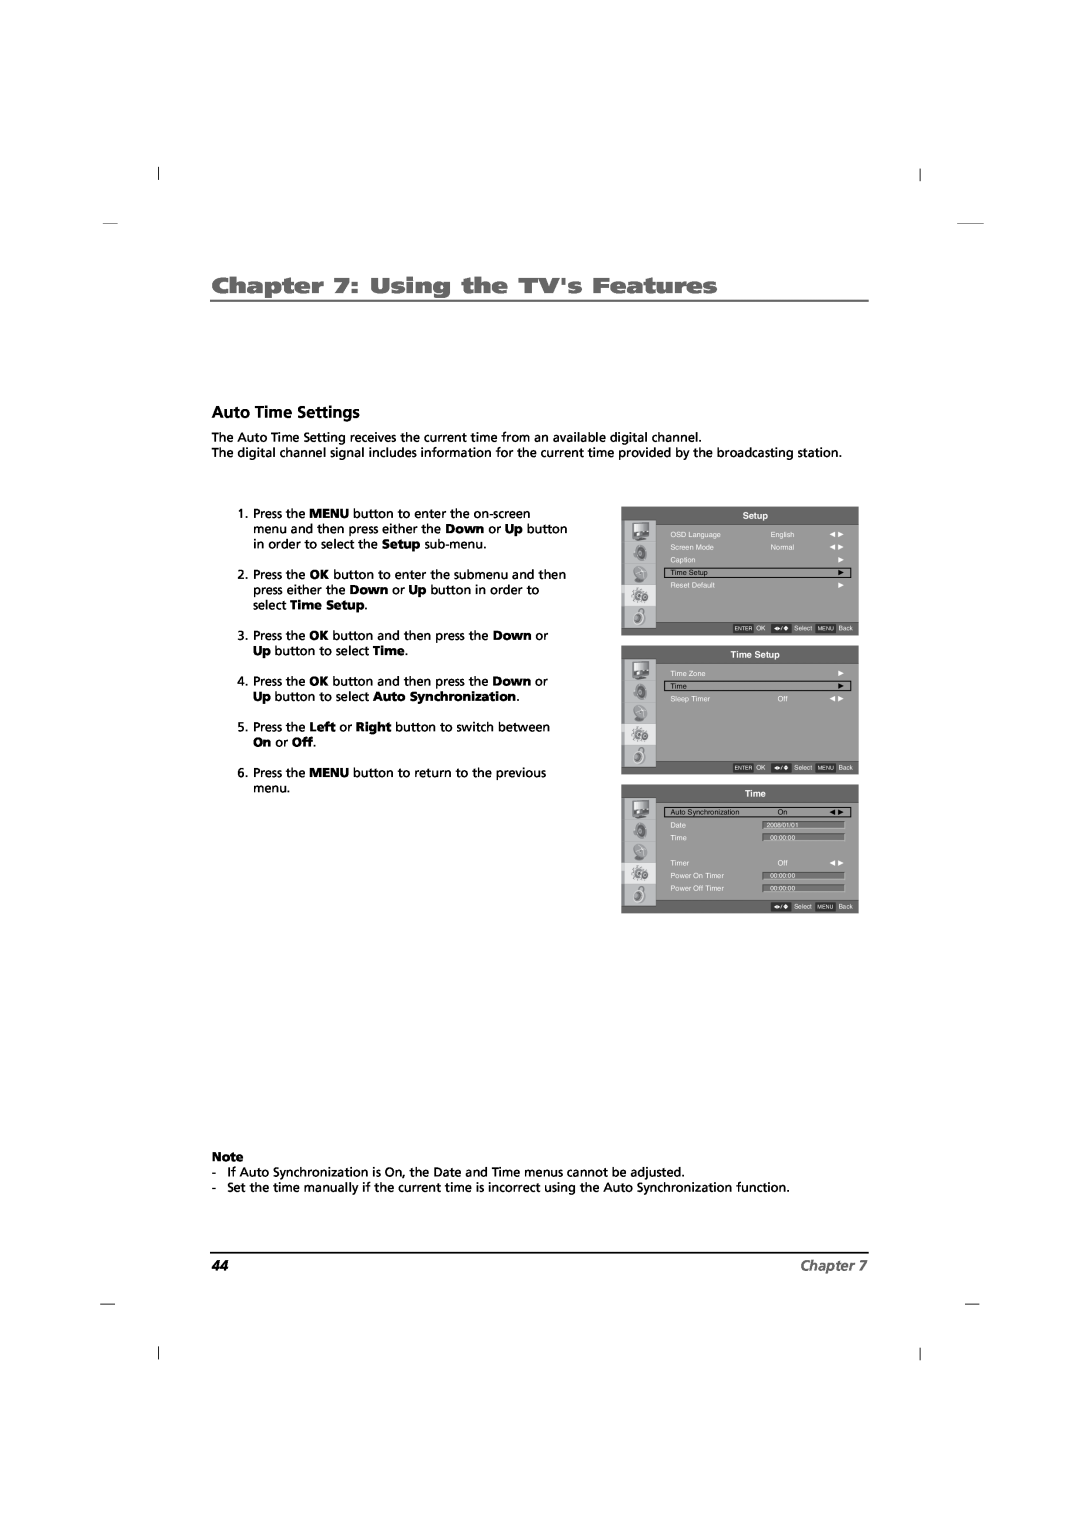 RCA J12H770 manual Auto Time Settings, Using the TVs Features, Chapter 